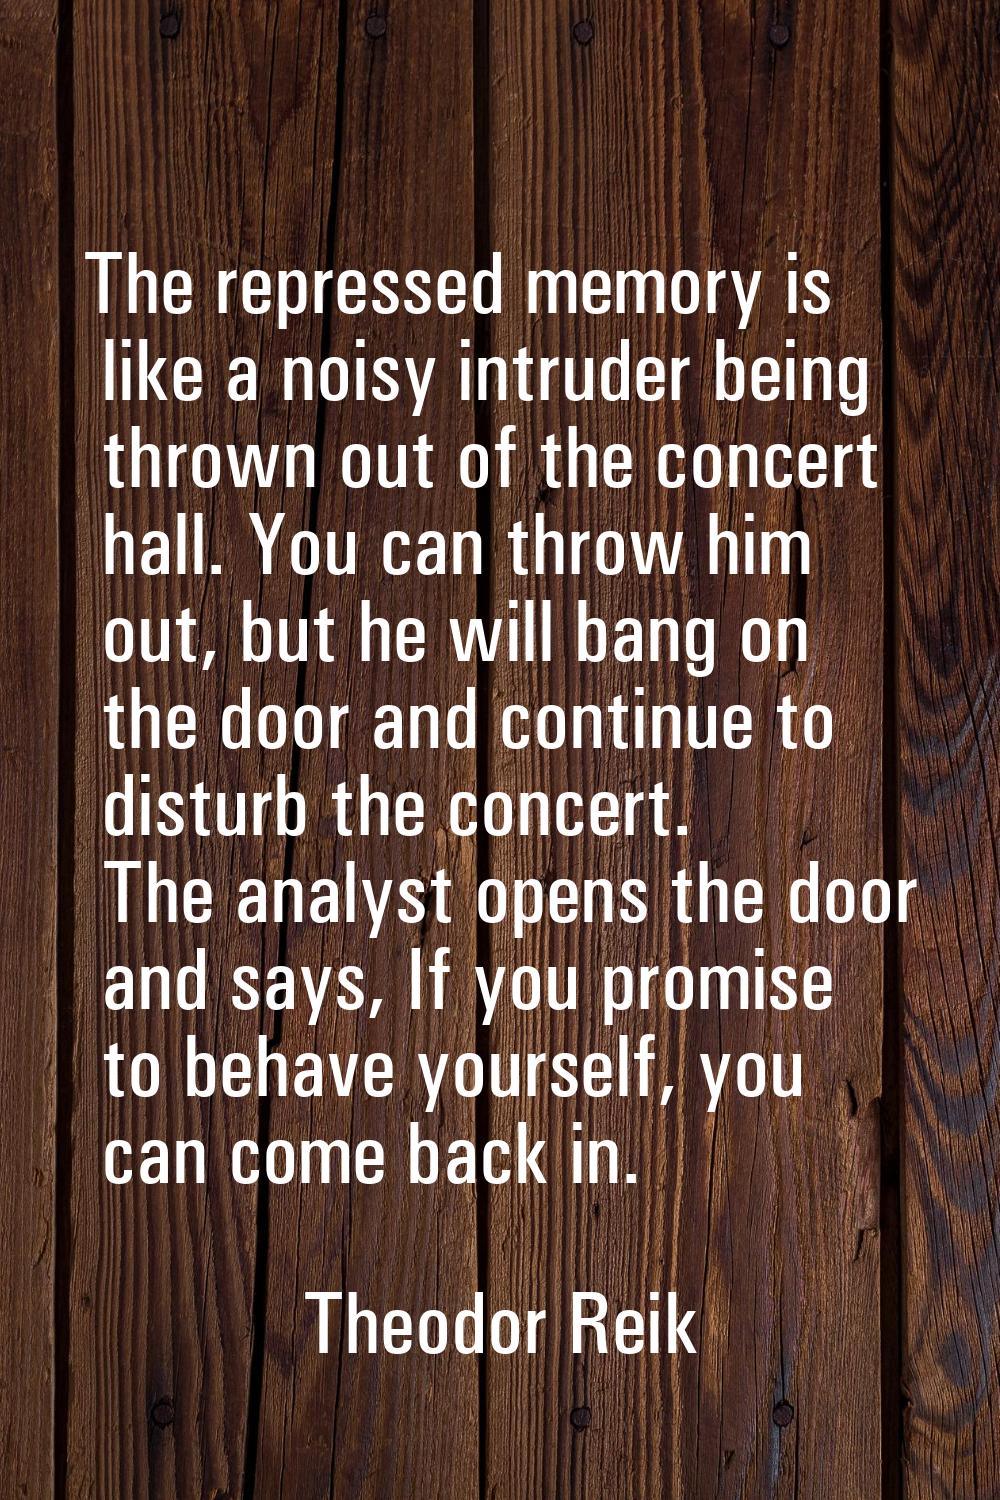 The repressed memory is like a noisy intruder being thrown out of the concert hall. You can throw h